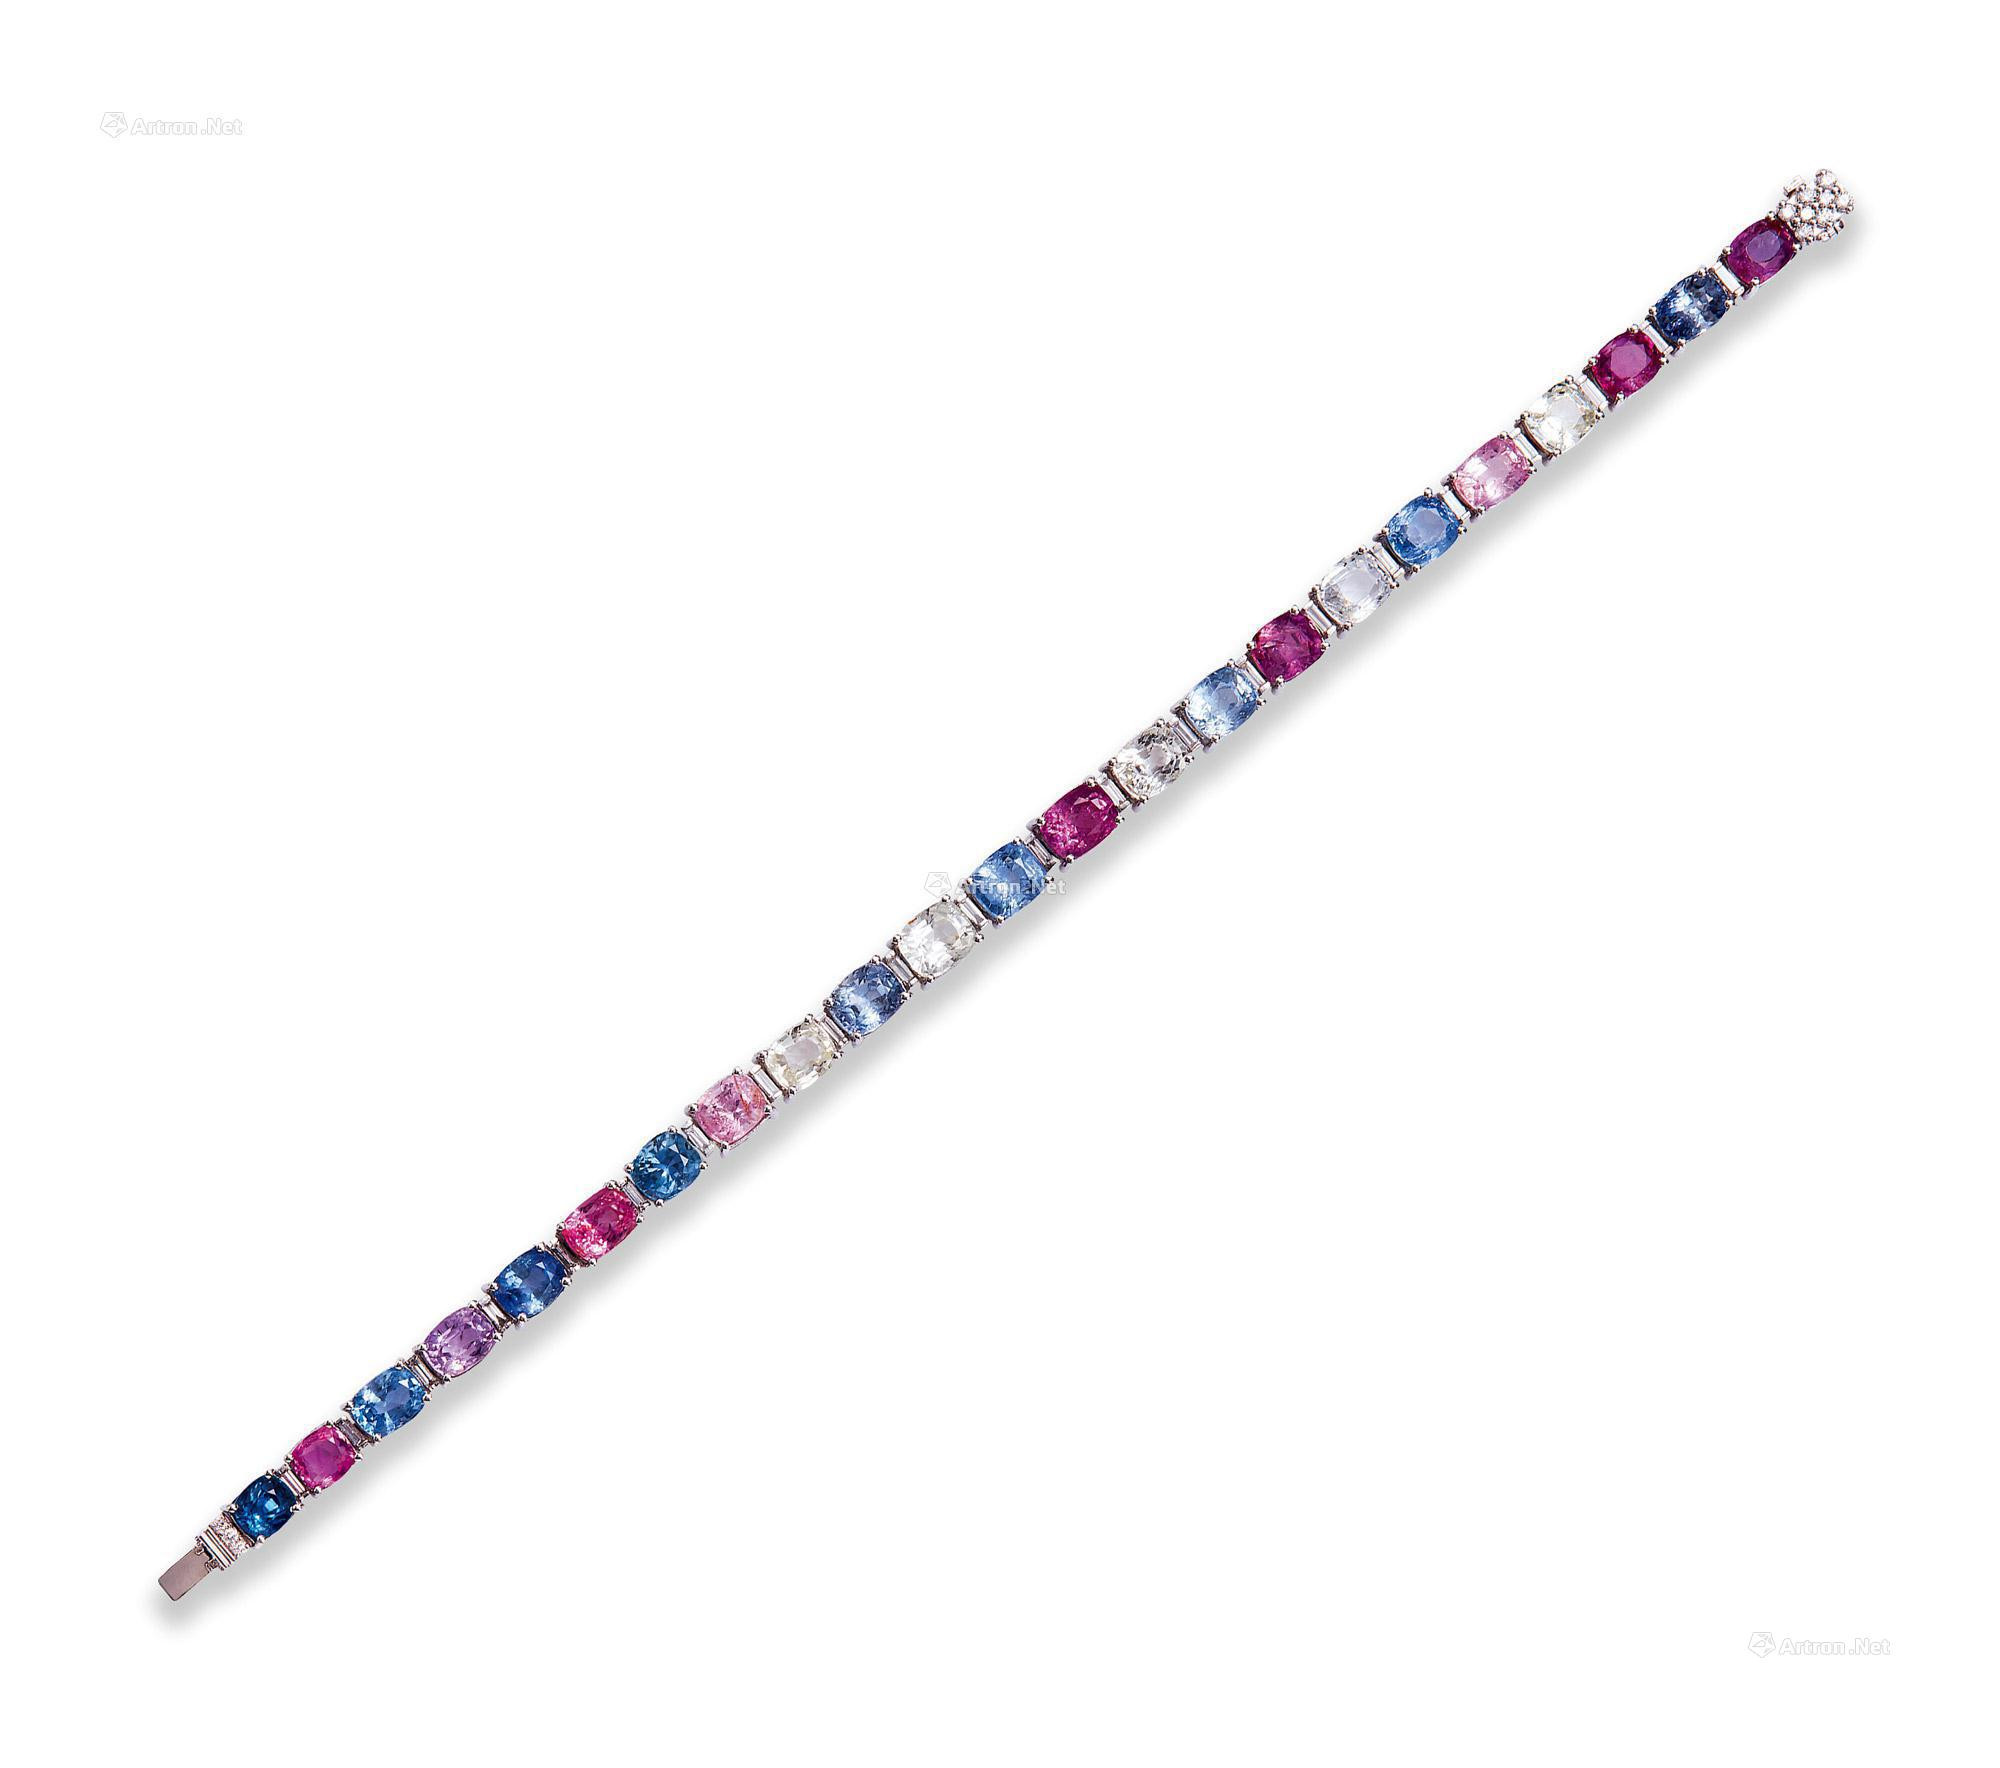 AN ALTOGETHER WEIGHING 23.05 CARATS COLORED SAPPHIRE AND DIAMOND BRACELET MOUNTED IN 18K WHITE GOLD